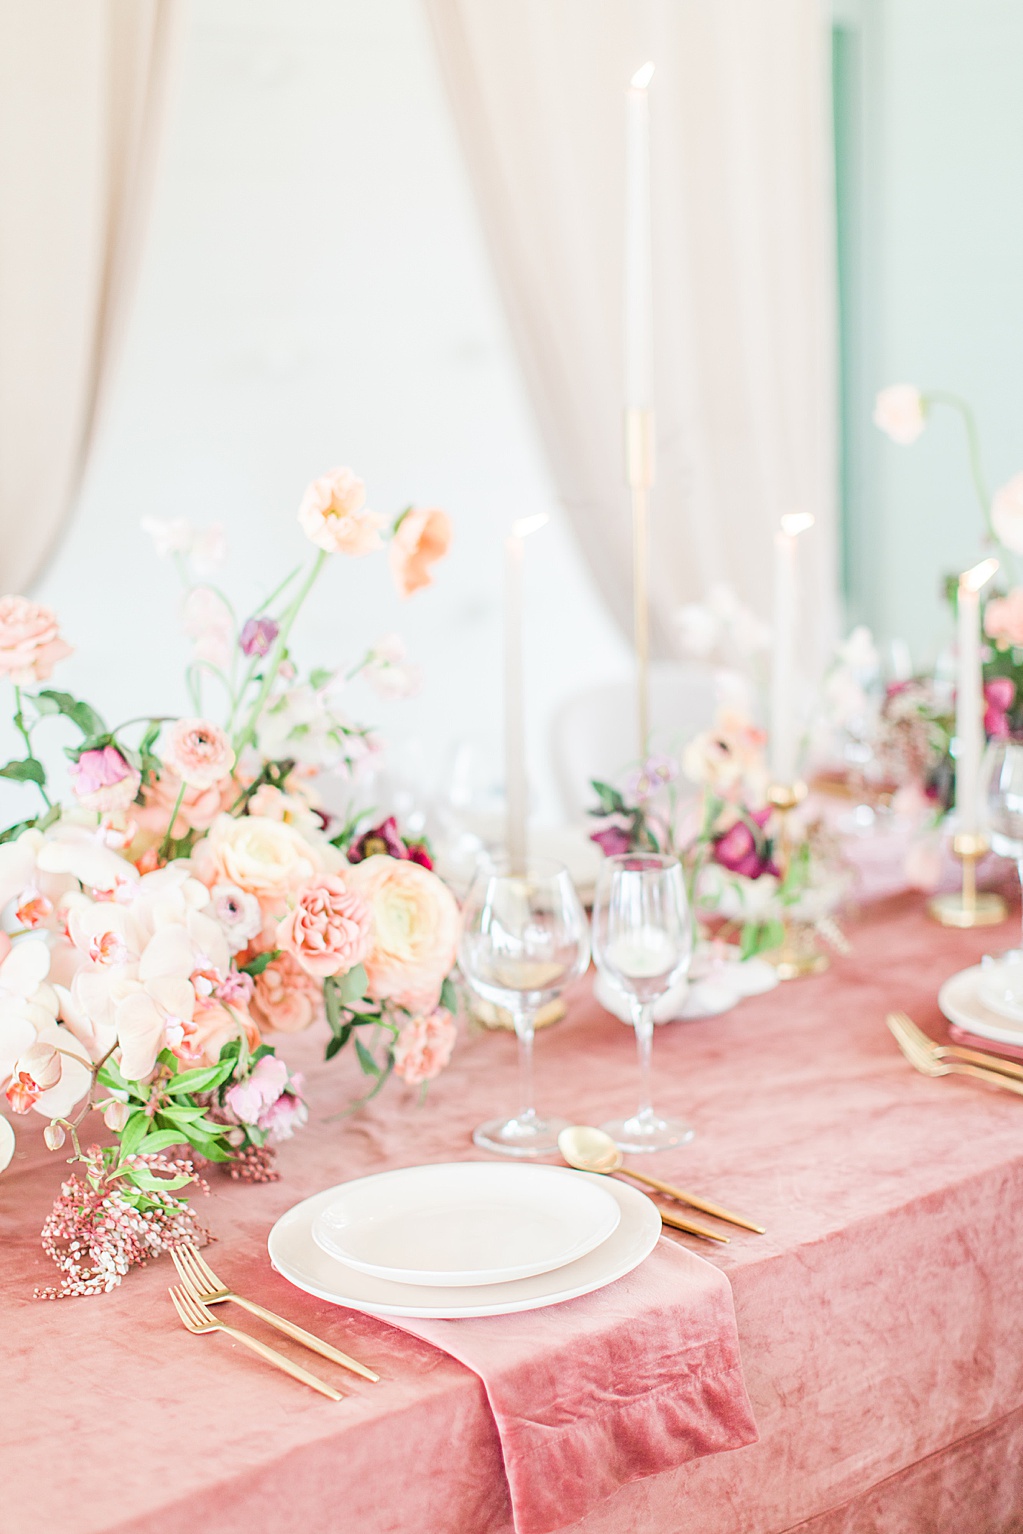 Blush mauve peach and coral wedding inspiration at Prospect House in Dripping Springs Texas wedding venue by Allison Jeffers Photography 0007